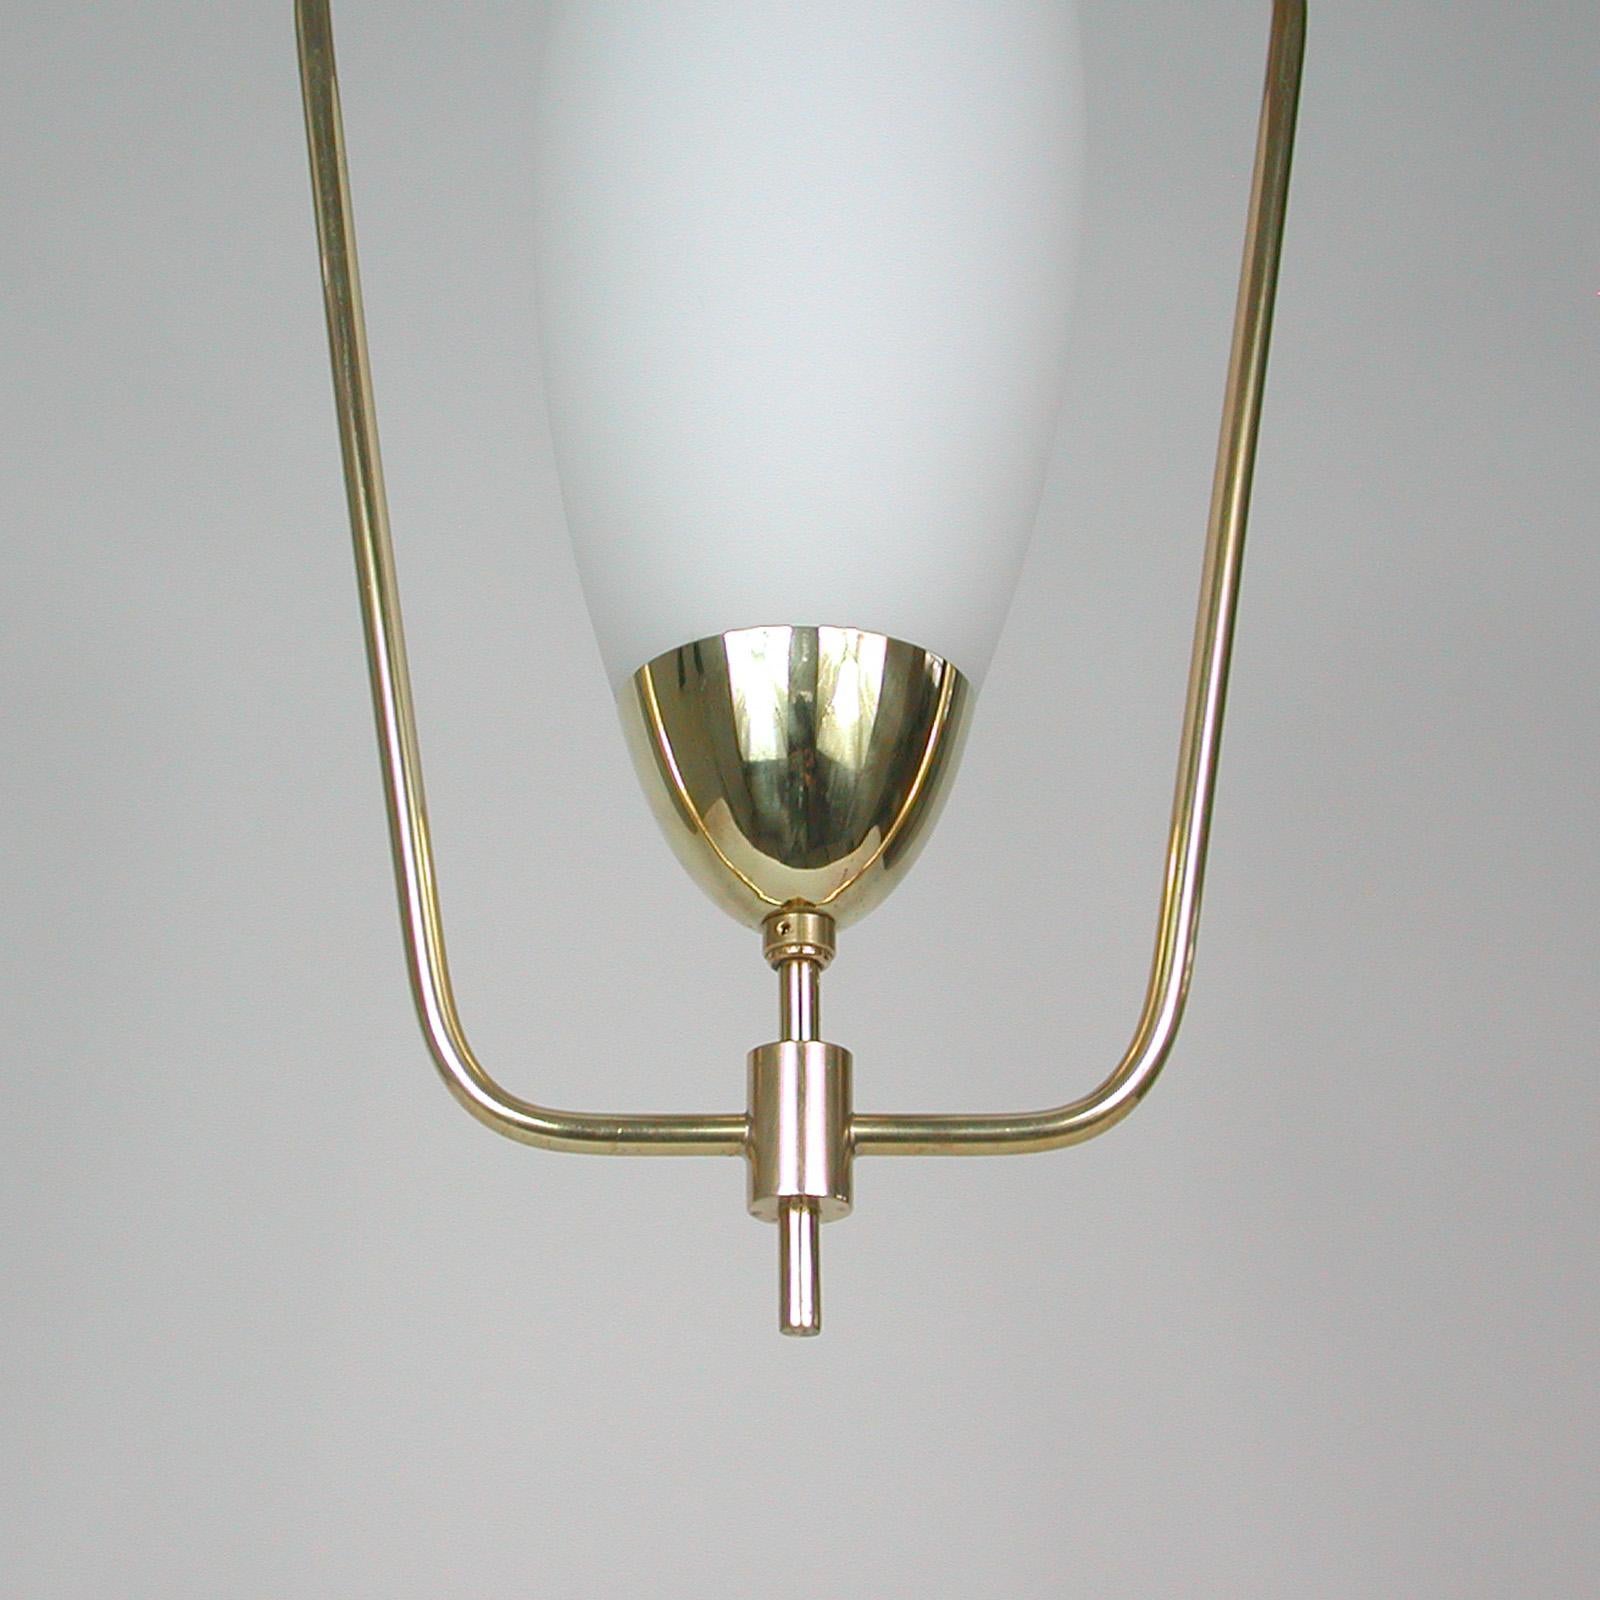 Midcentury French Maison Arlus Brass & Opaline Glass Pendant, 1950s For Sale 3